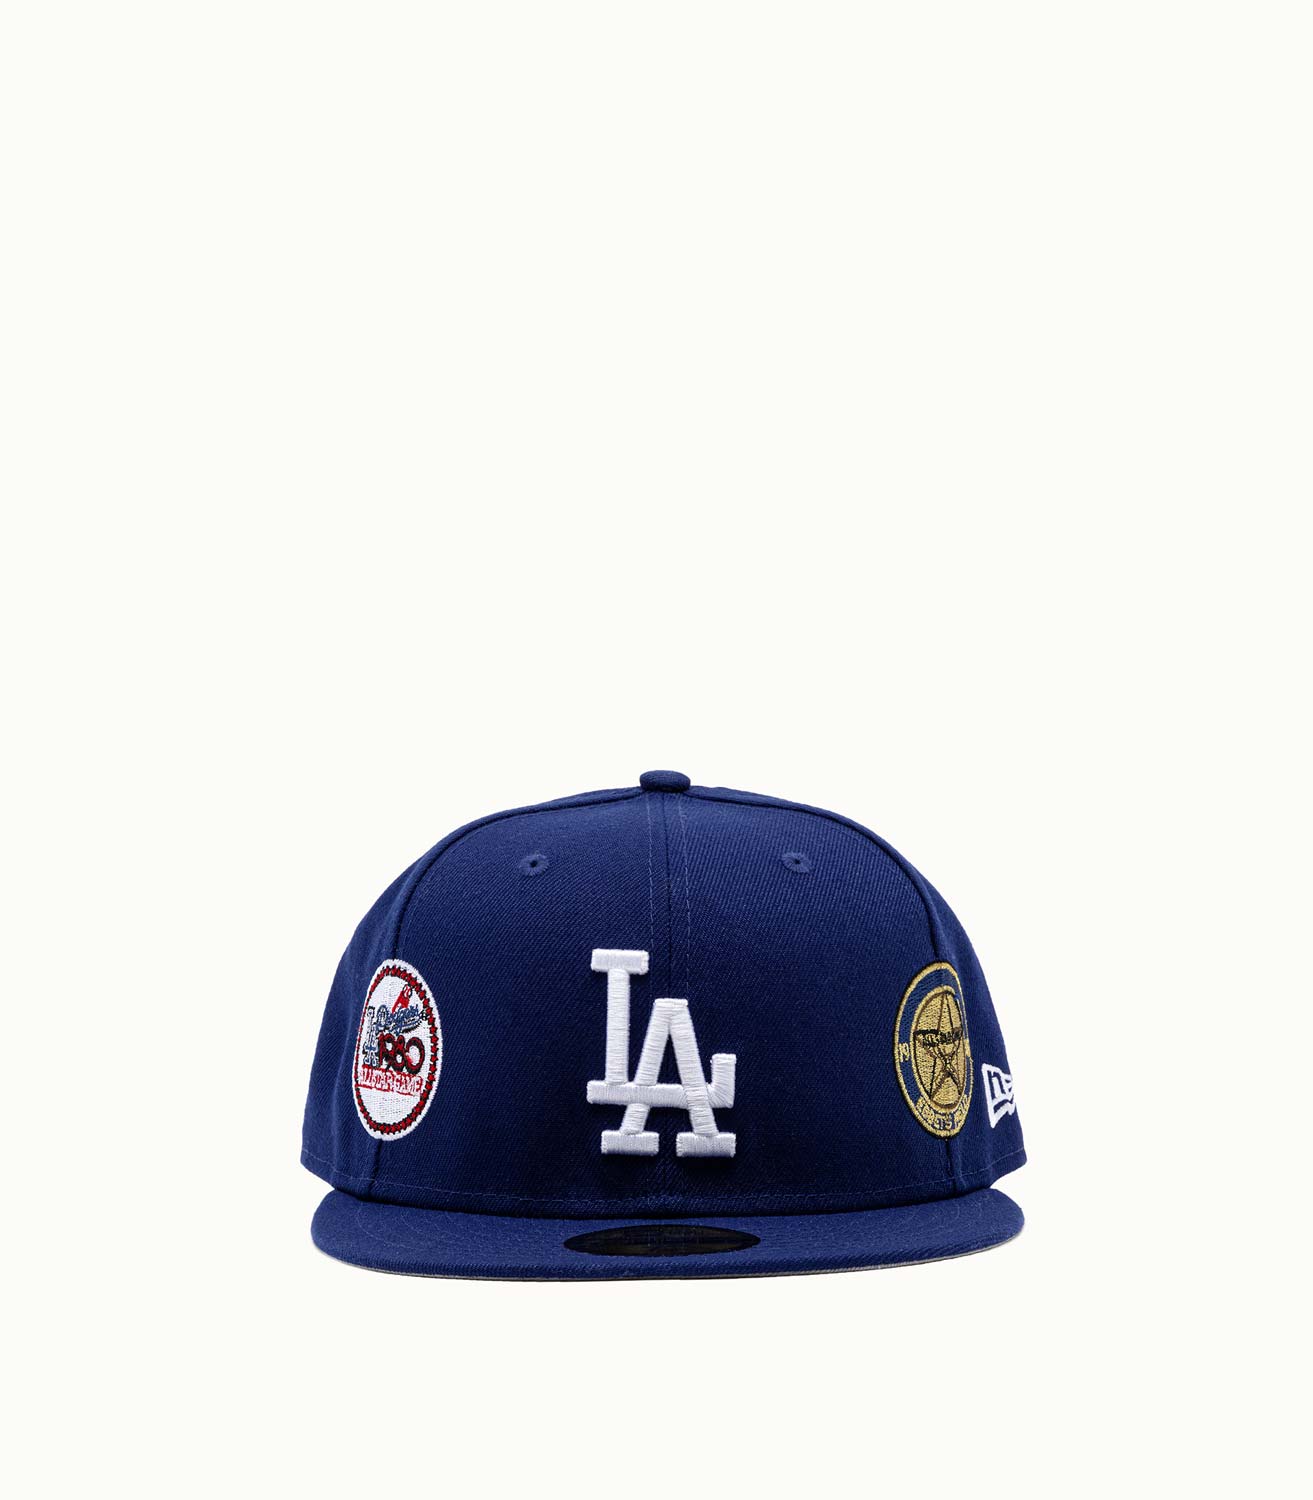 Los Angelos Dodgers Embroidered T-Shirt M